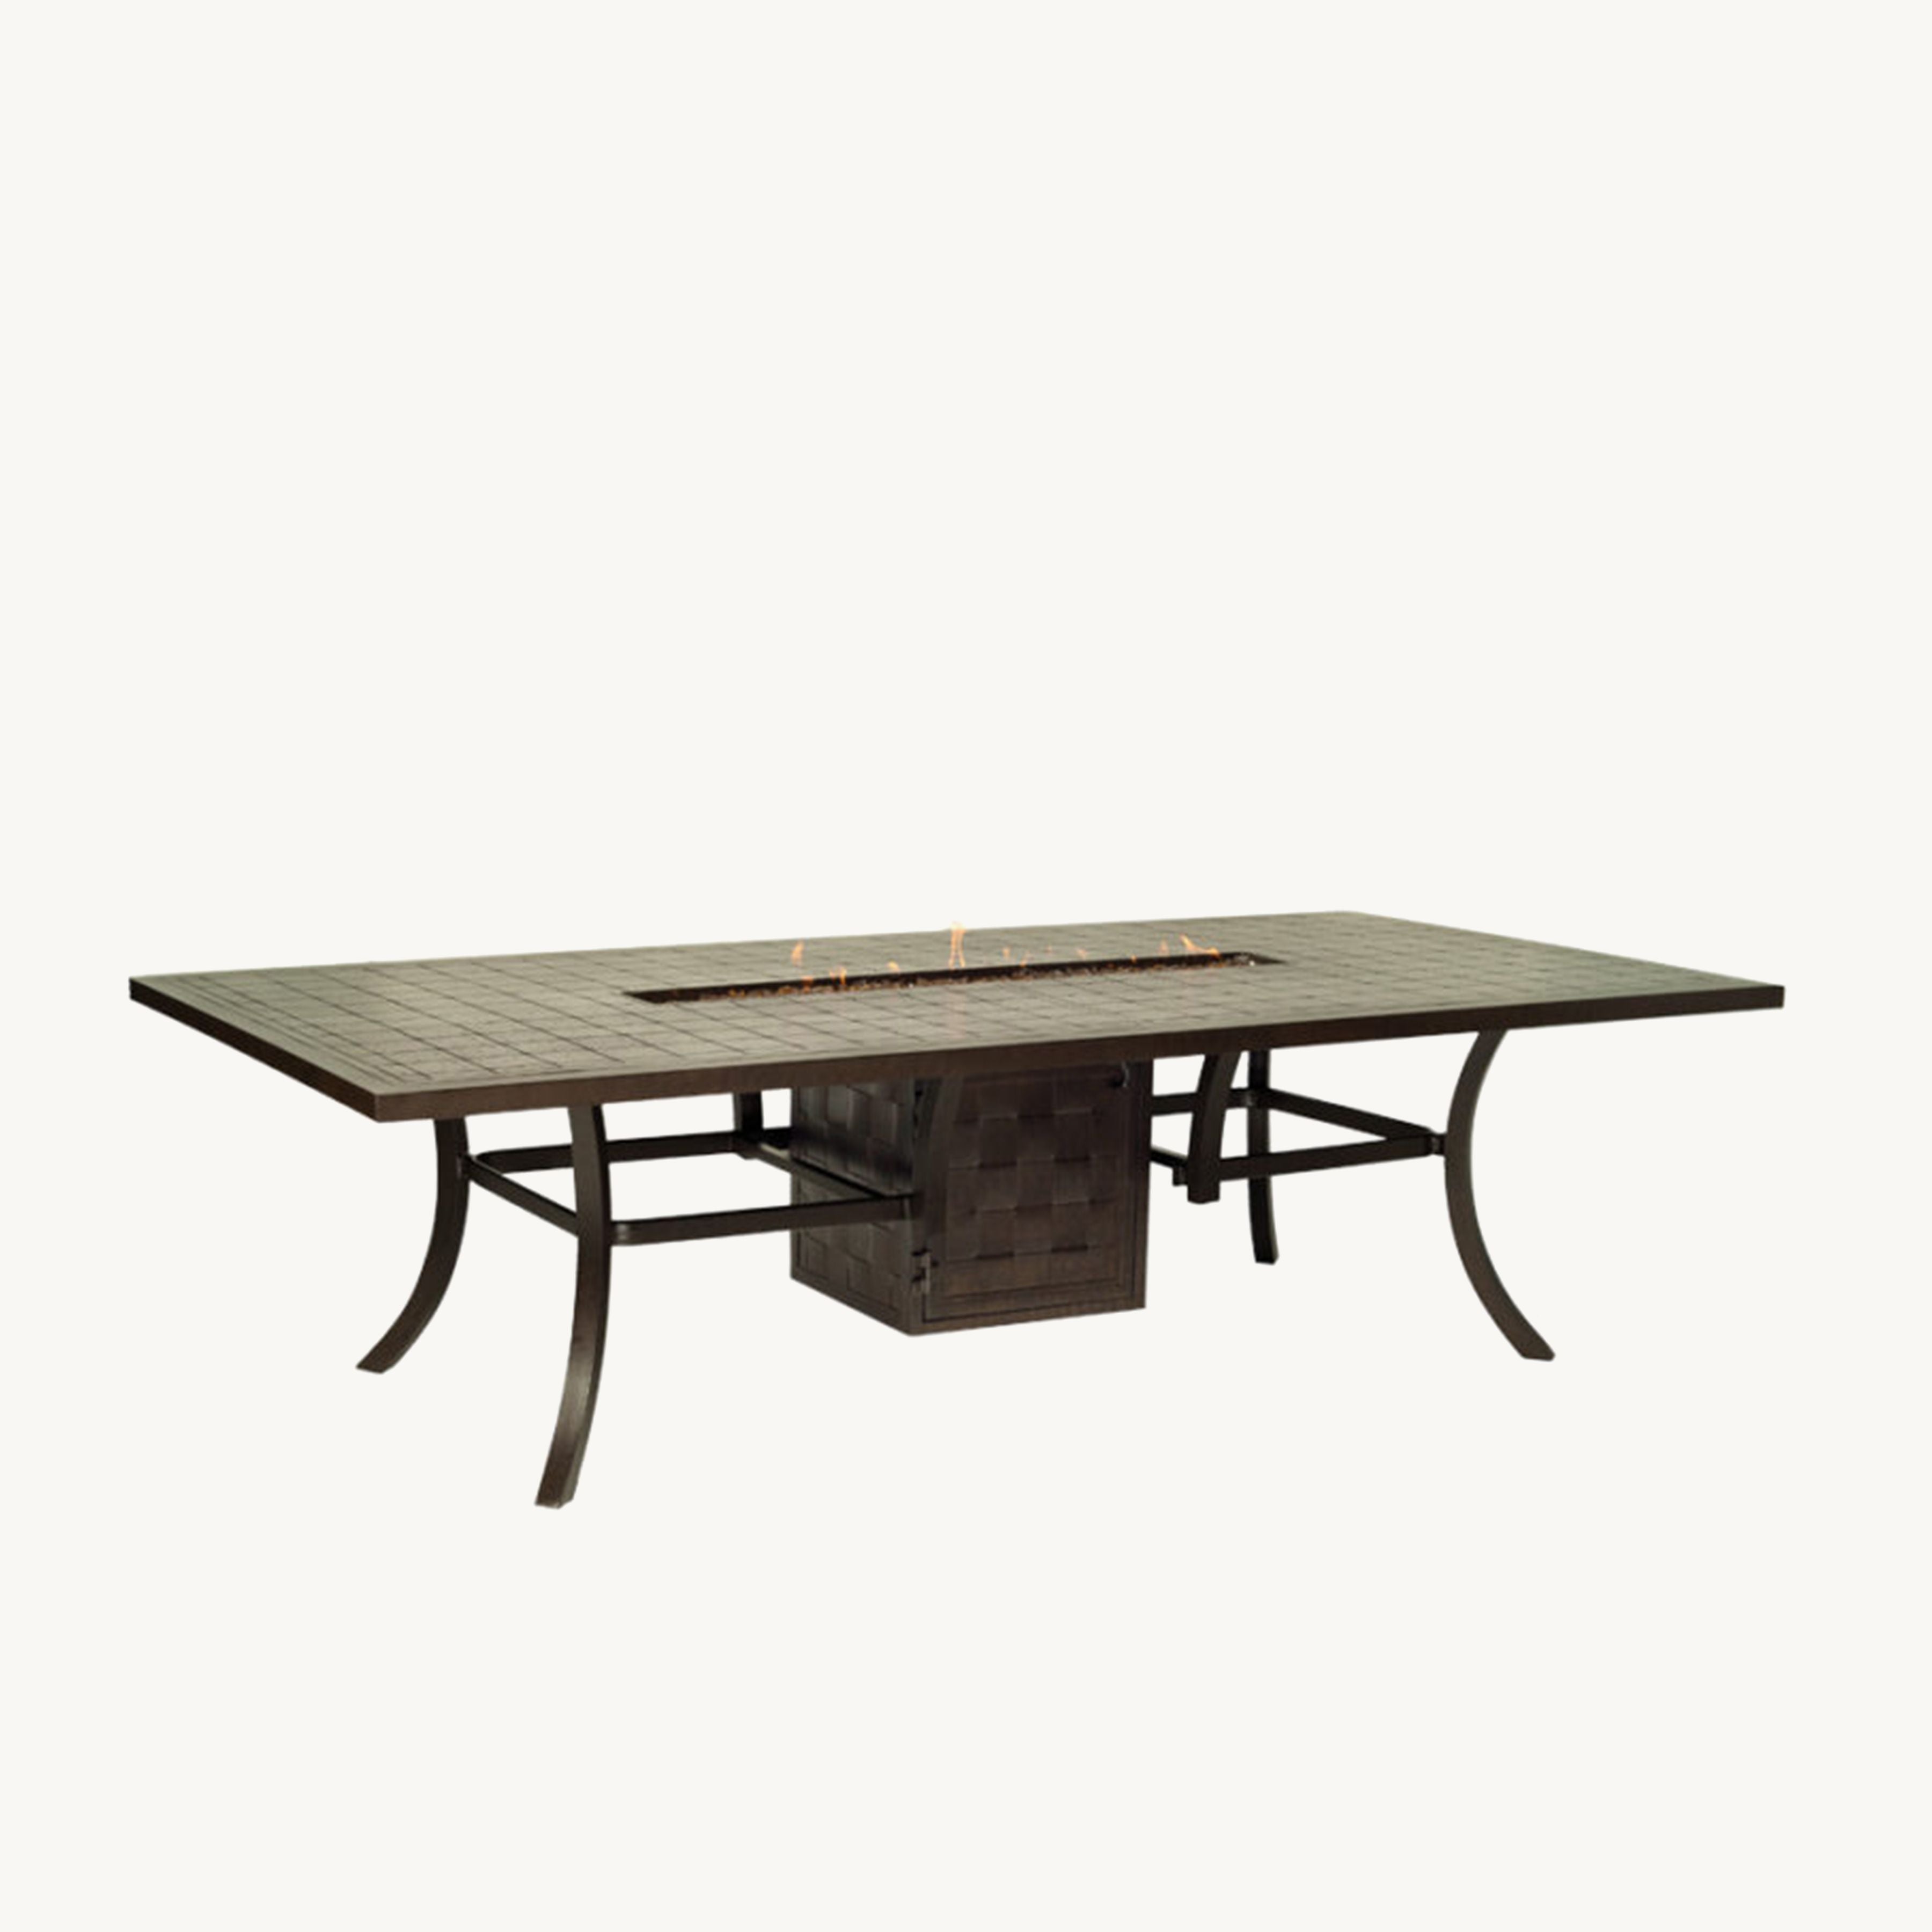 Classical 54" X 108" Rectangular Classical Dining Table With Firepit By Castelle